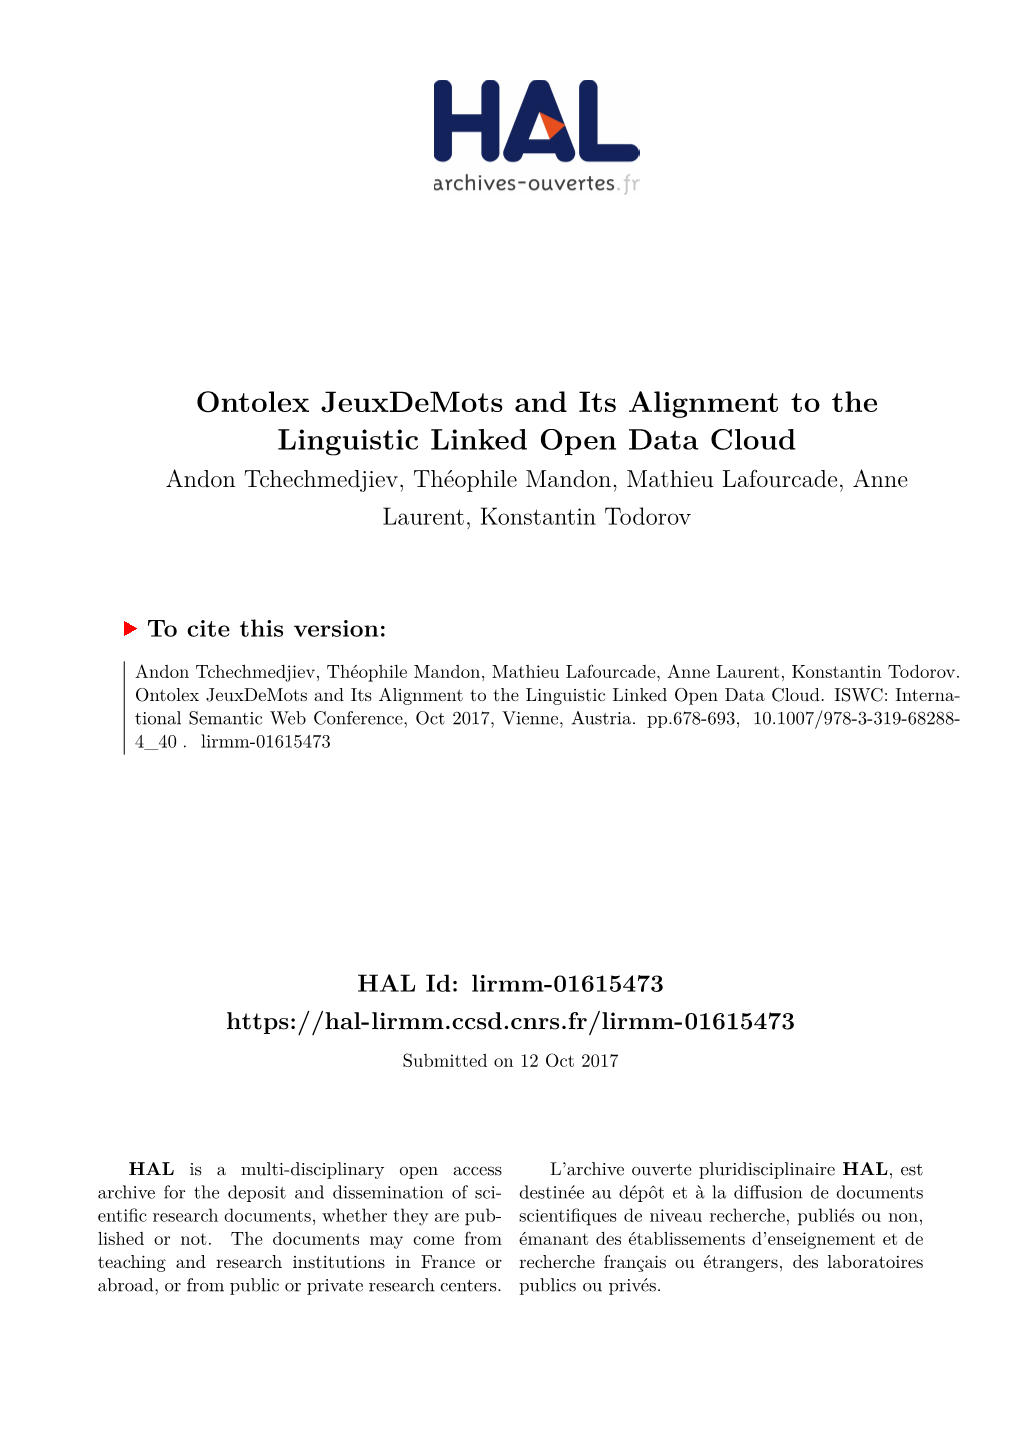 Ontolex Jeuxdemots and Its Alignment to The